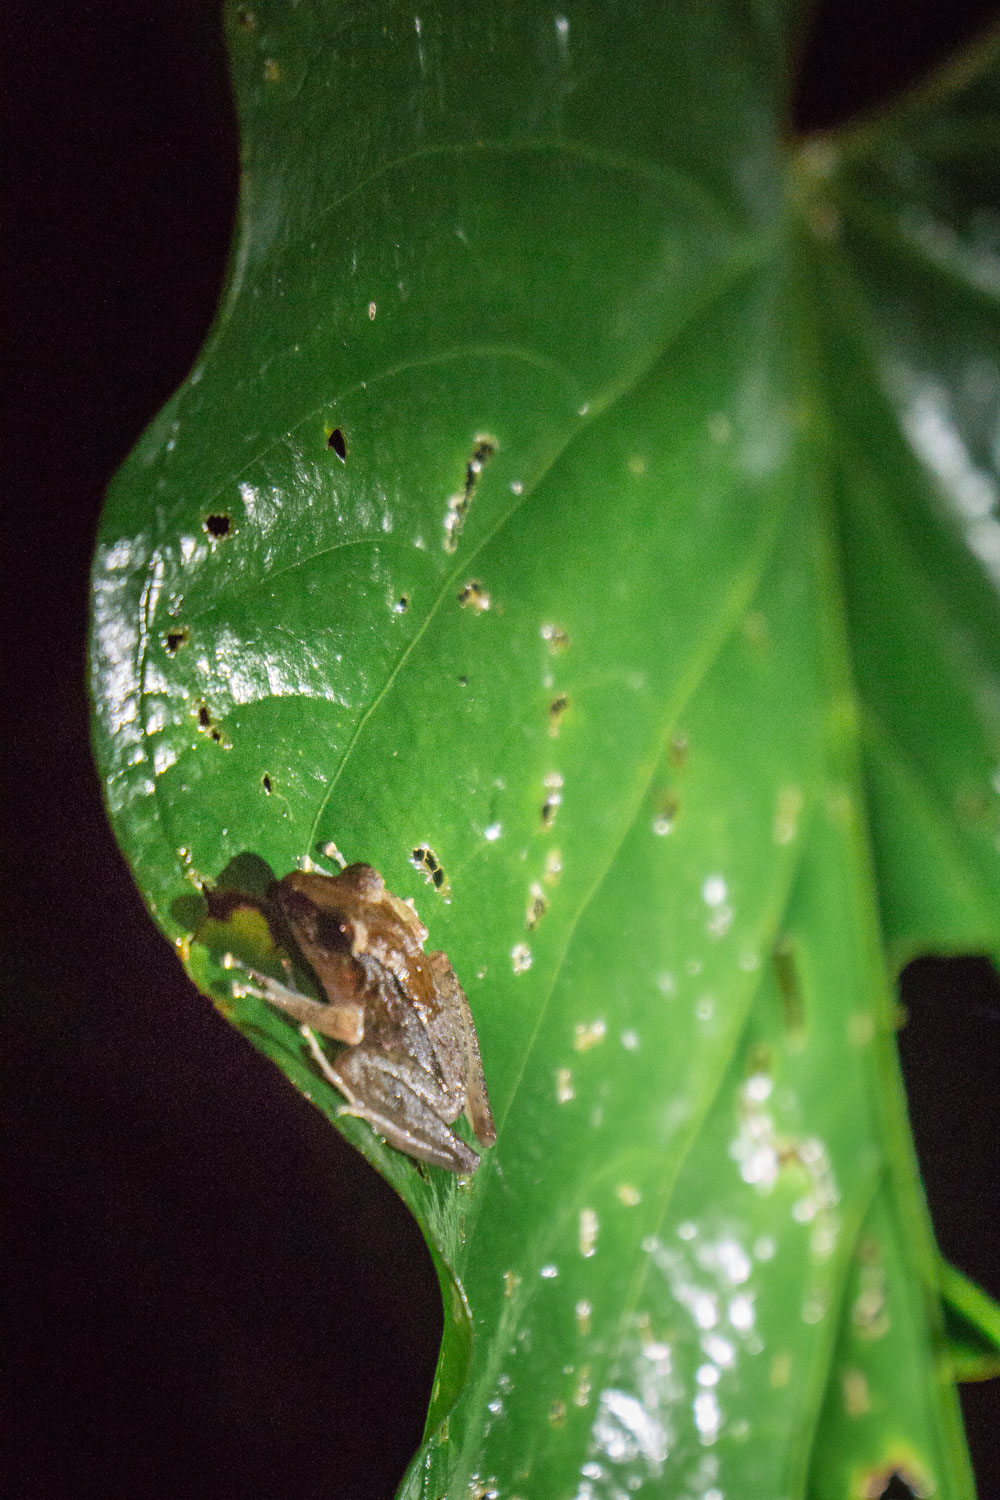 A small nocturnal frog nestled on a leaf